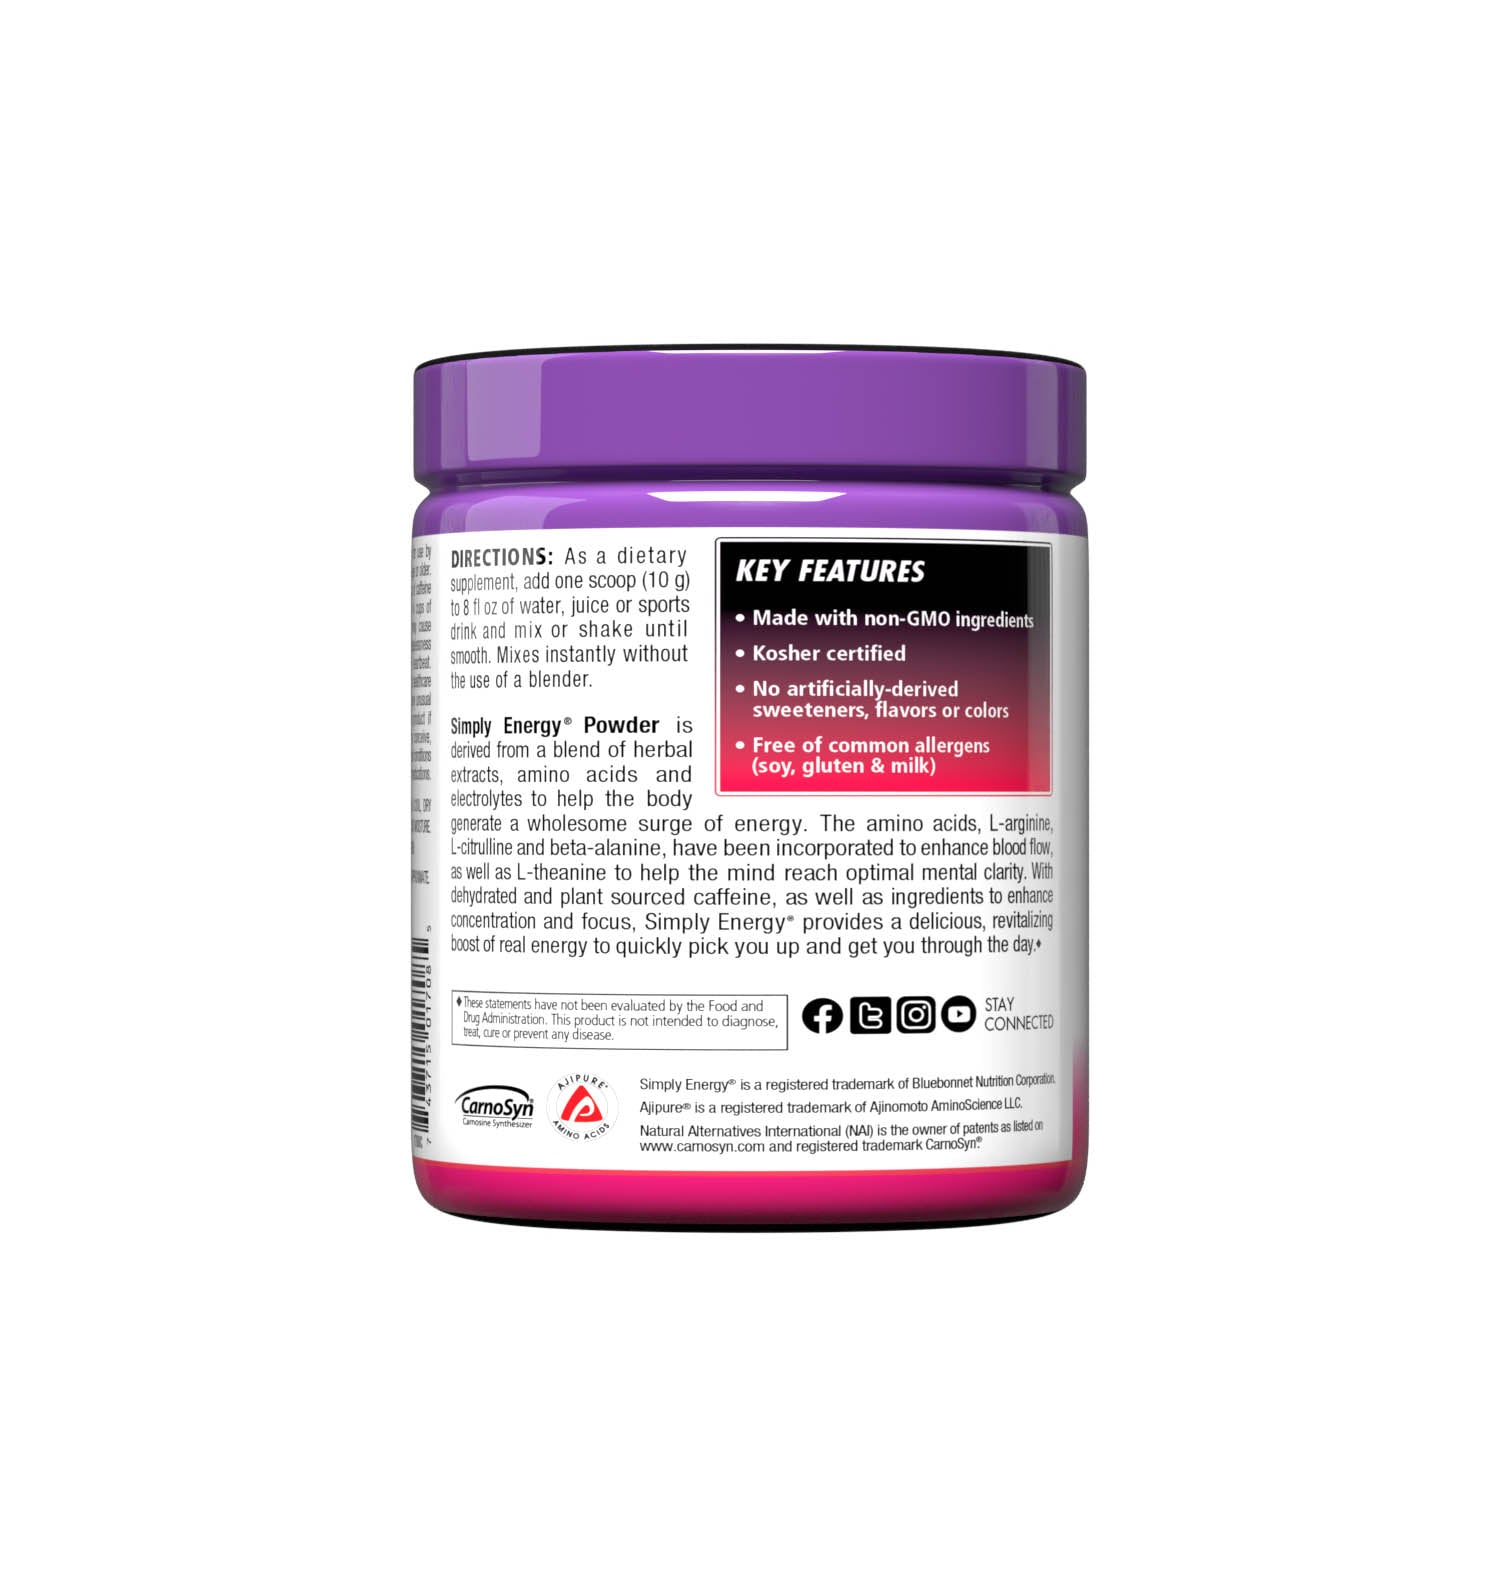 Simply Energy Powder is derived from a blend of herbal extracts, amino acids and electrolytes to help the body generate a wholesome surge of energy. The amino acids, L-arginine, L-citrulline and beta-alanine, have been incorporated to enhance blood flow, as well as theanine to help the mind reach optimal mental clarity. Description panel. #size_10.58 oz